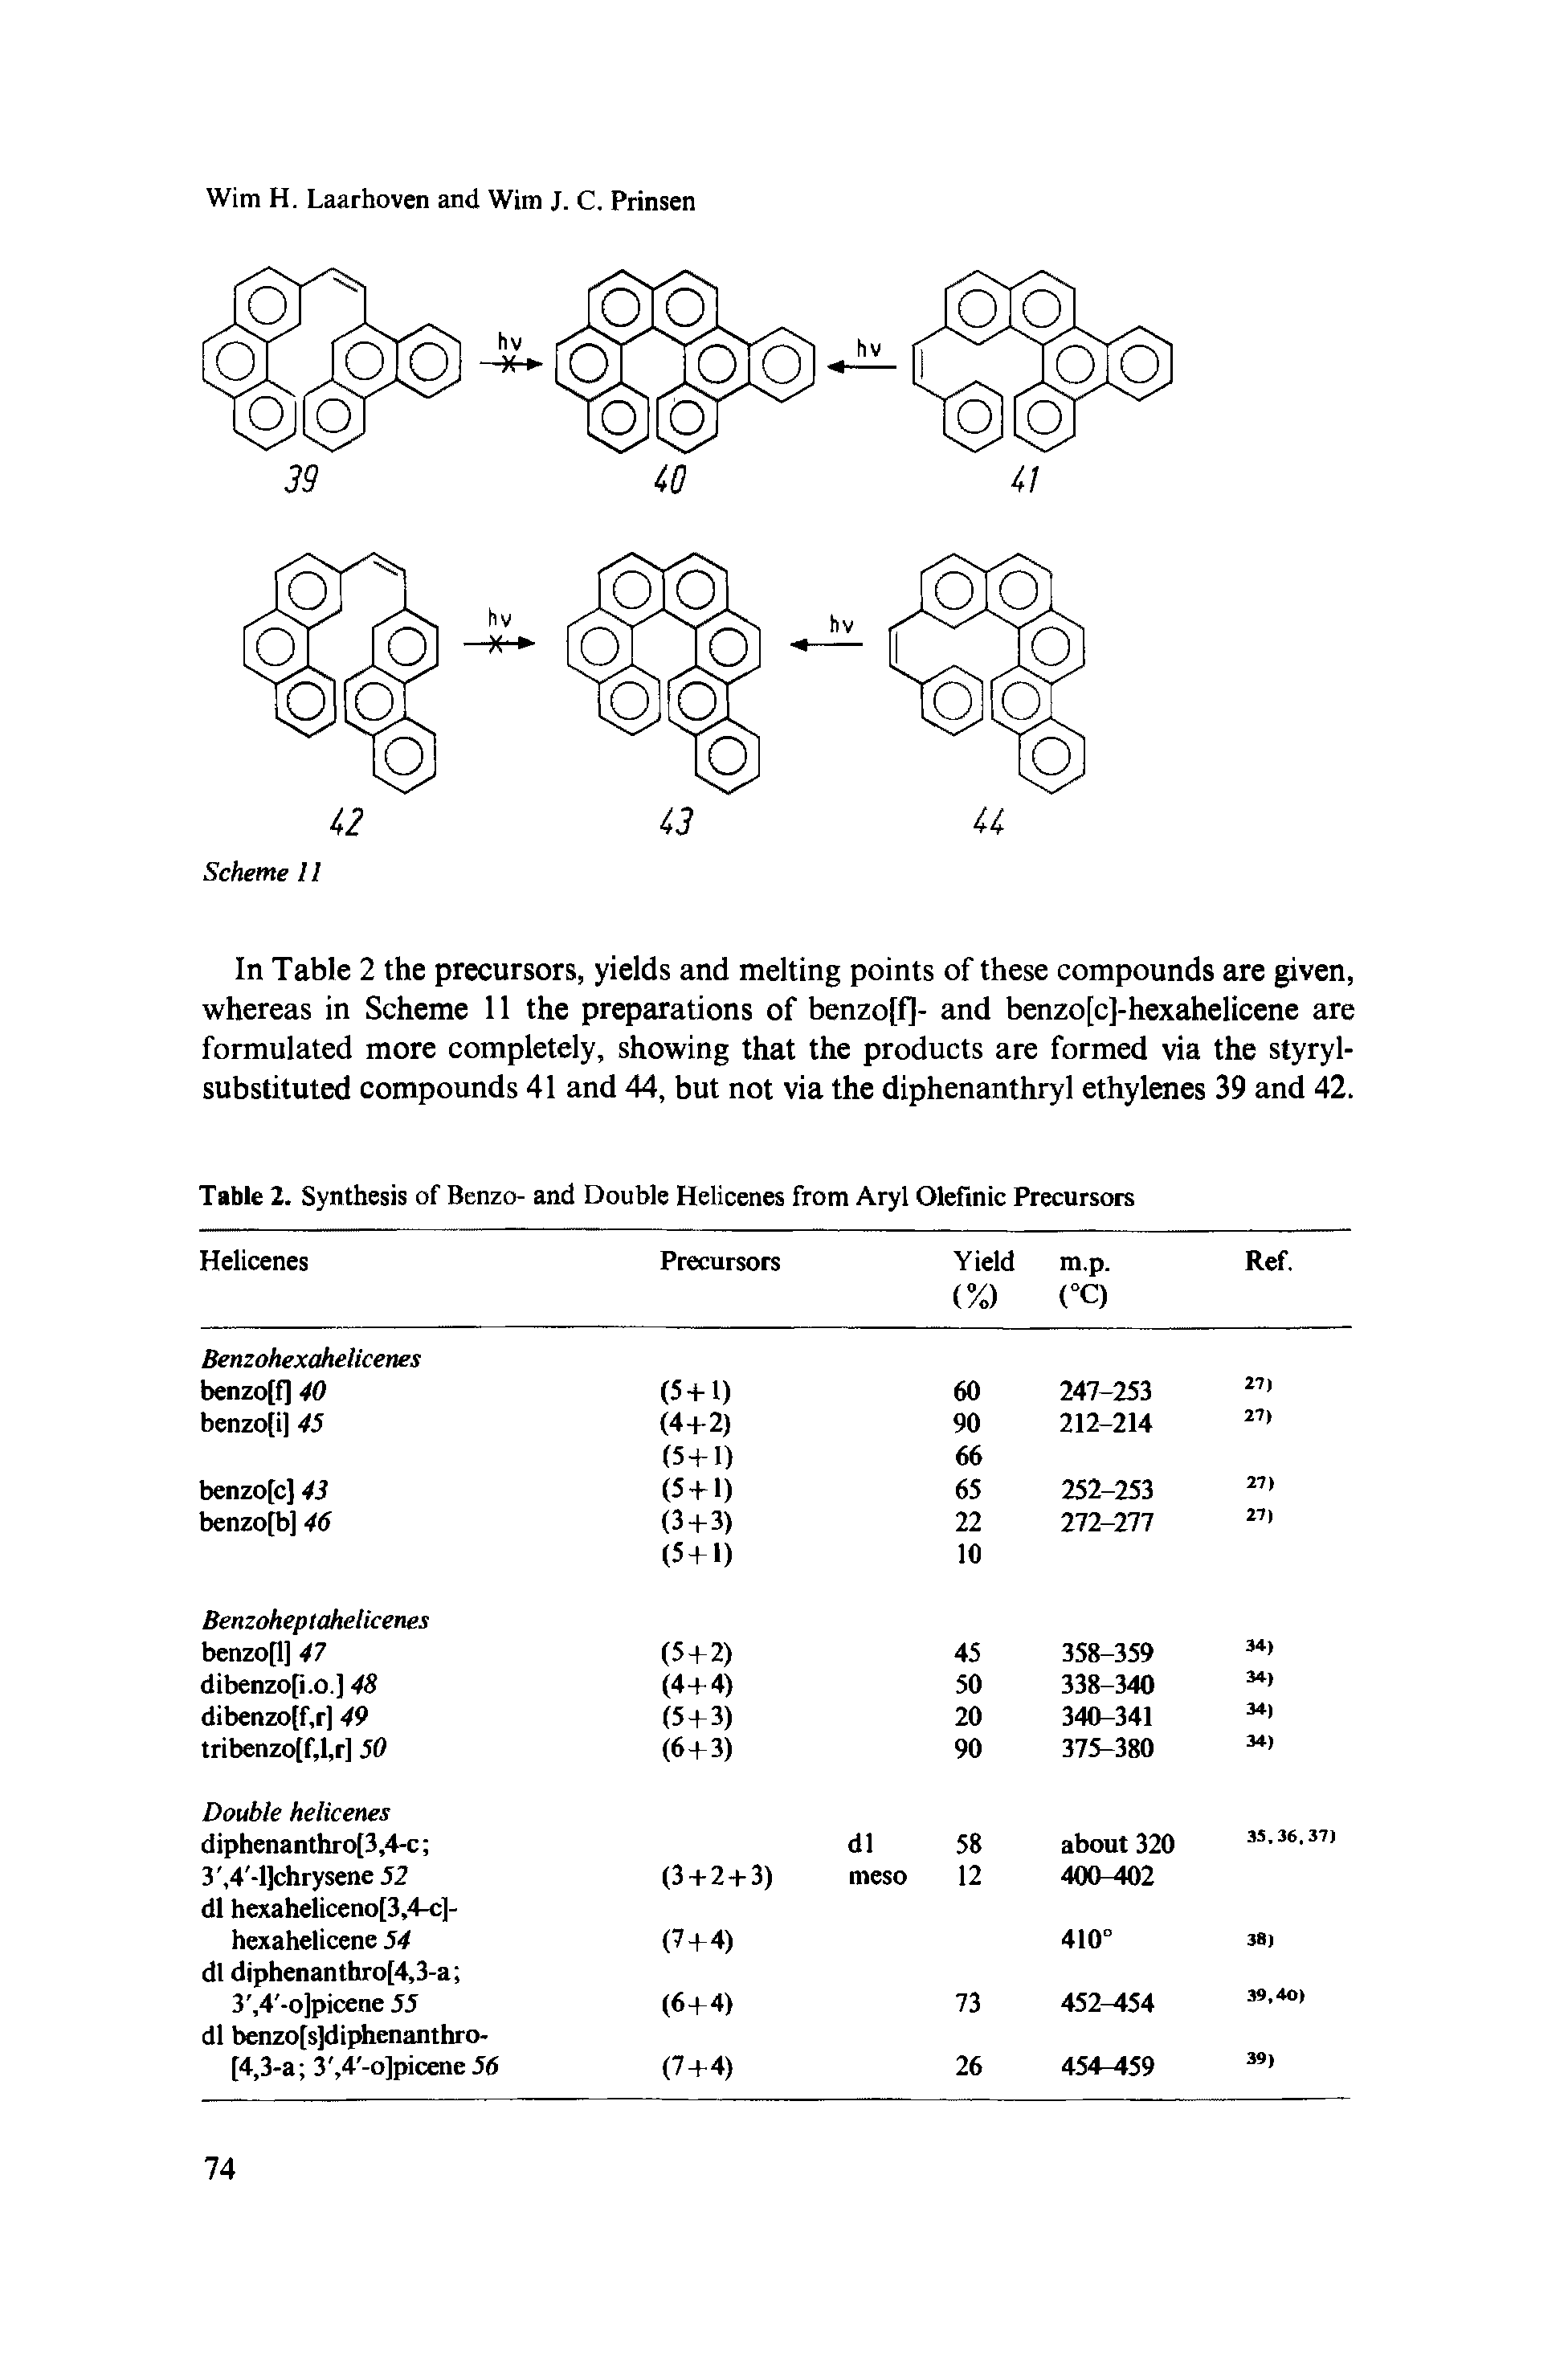 Table 2. Synthesis of Benzo- and Double Helicenes from Aryl Olefinic Precursors...